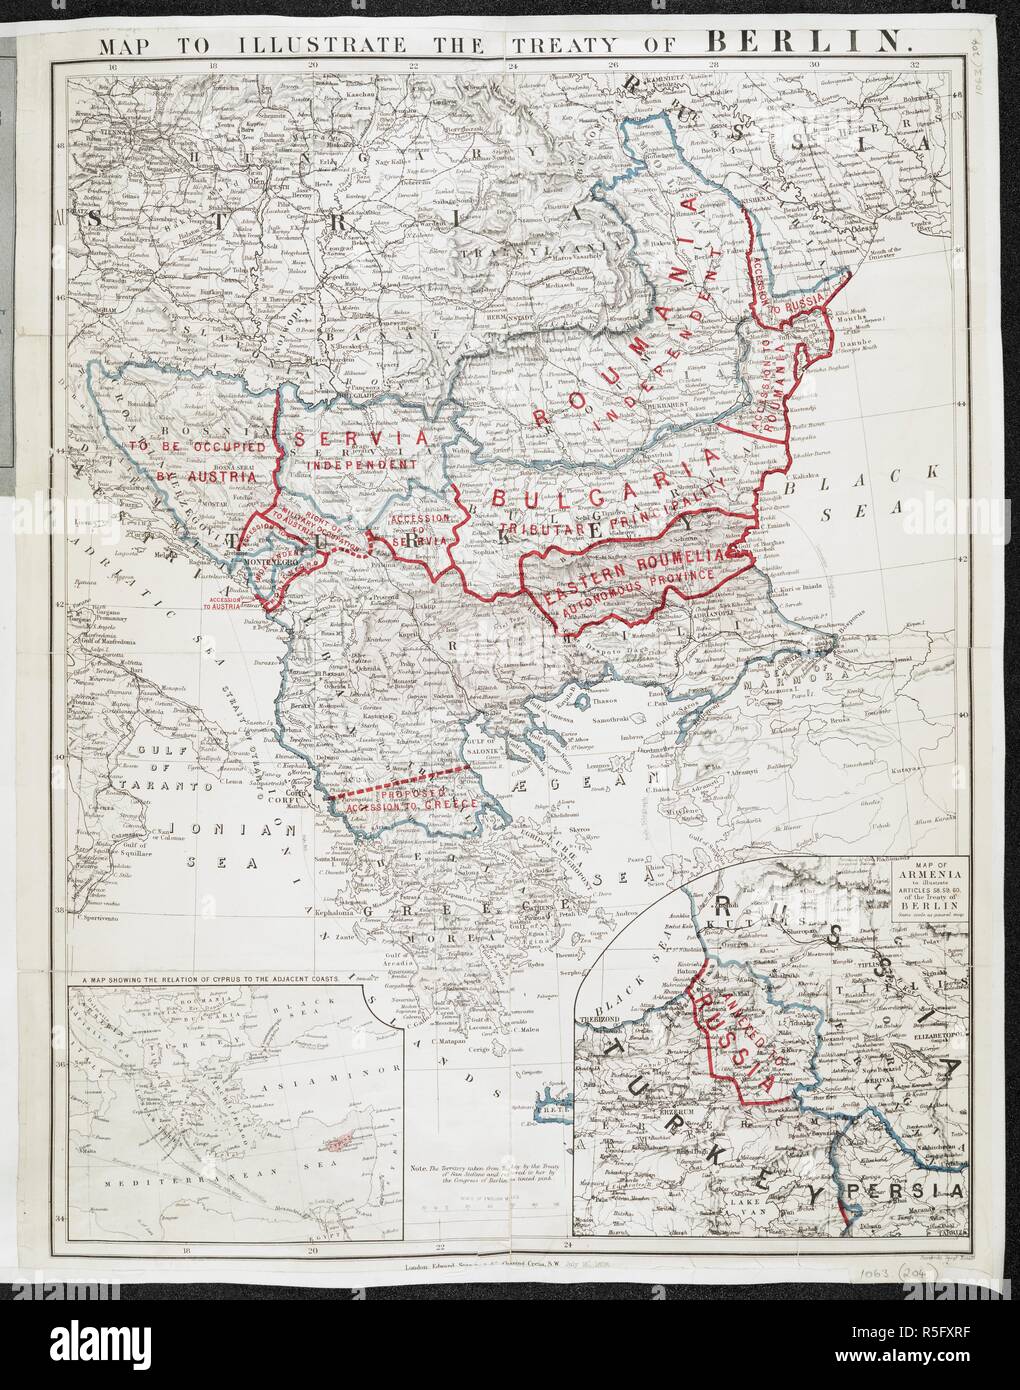 A map to illustrate the treaty of Berlin. Map to illustrate the treaty of Berlin. London : Edward Stanford, 1878. Source: Maps 1063.(204.). Language: English. Stock Photo